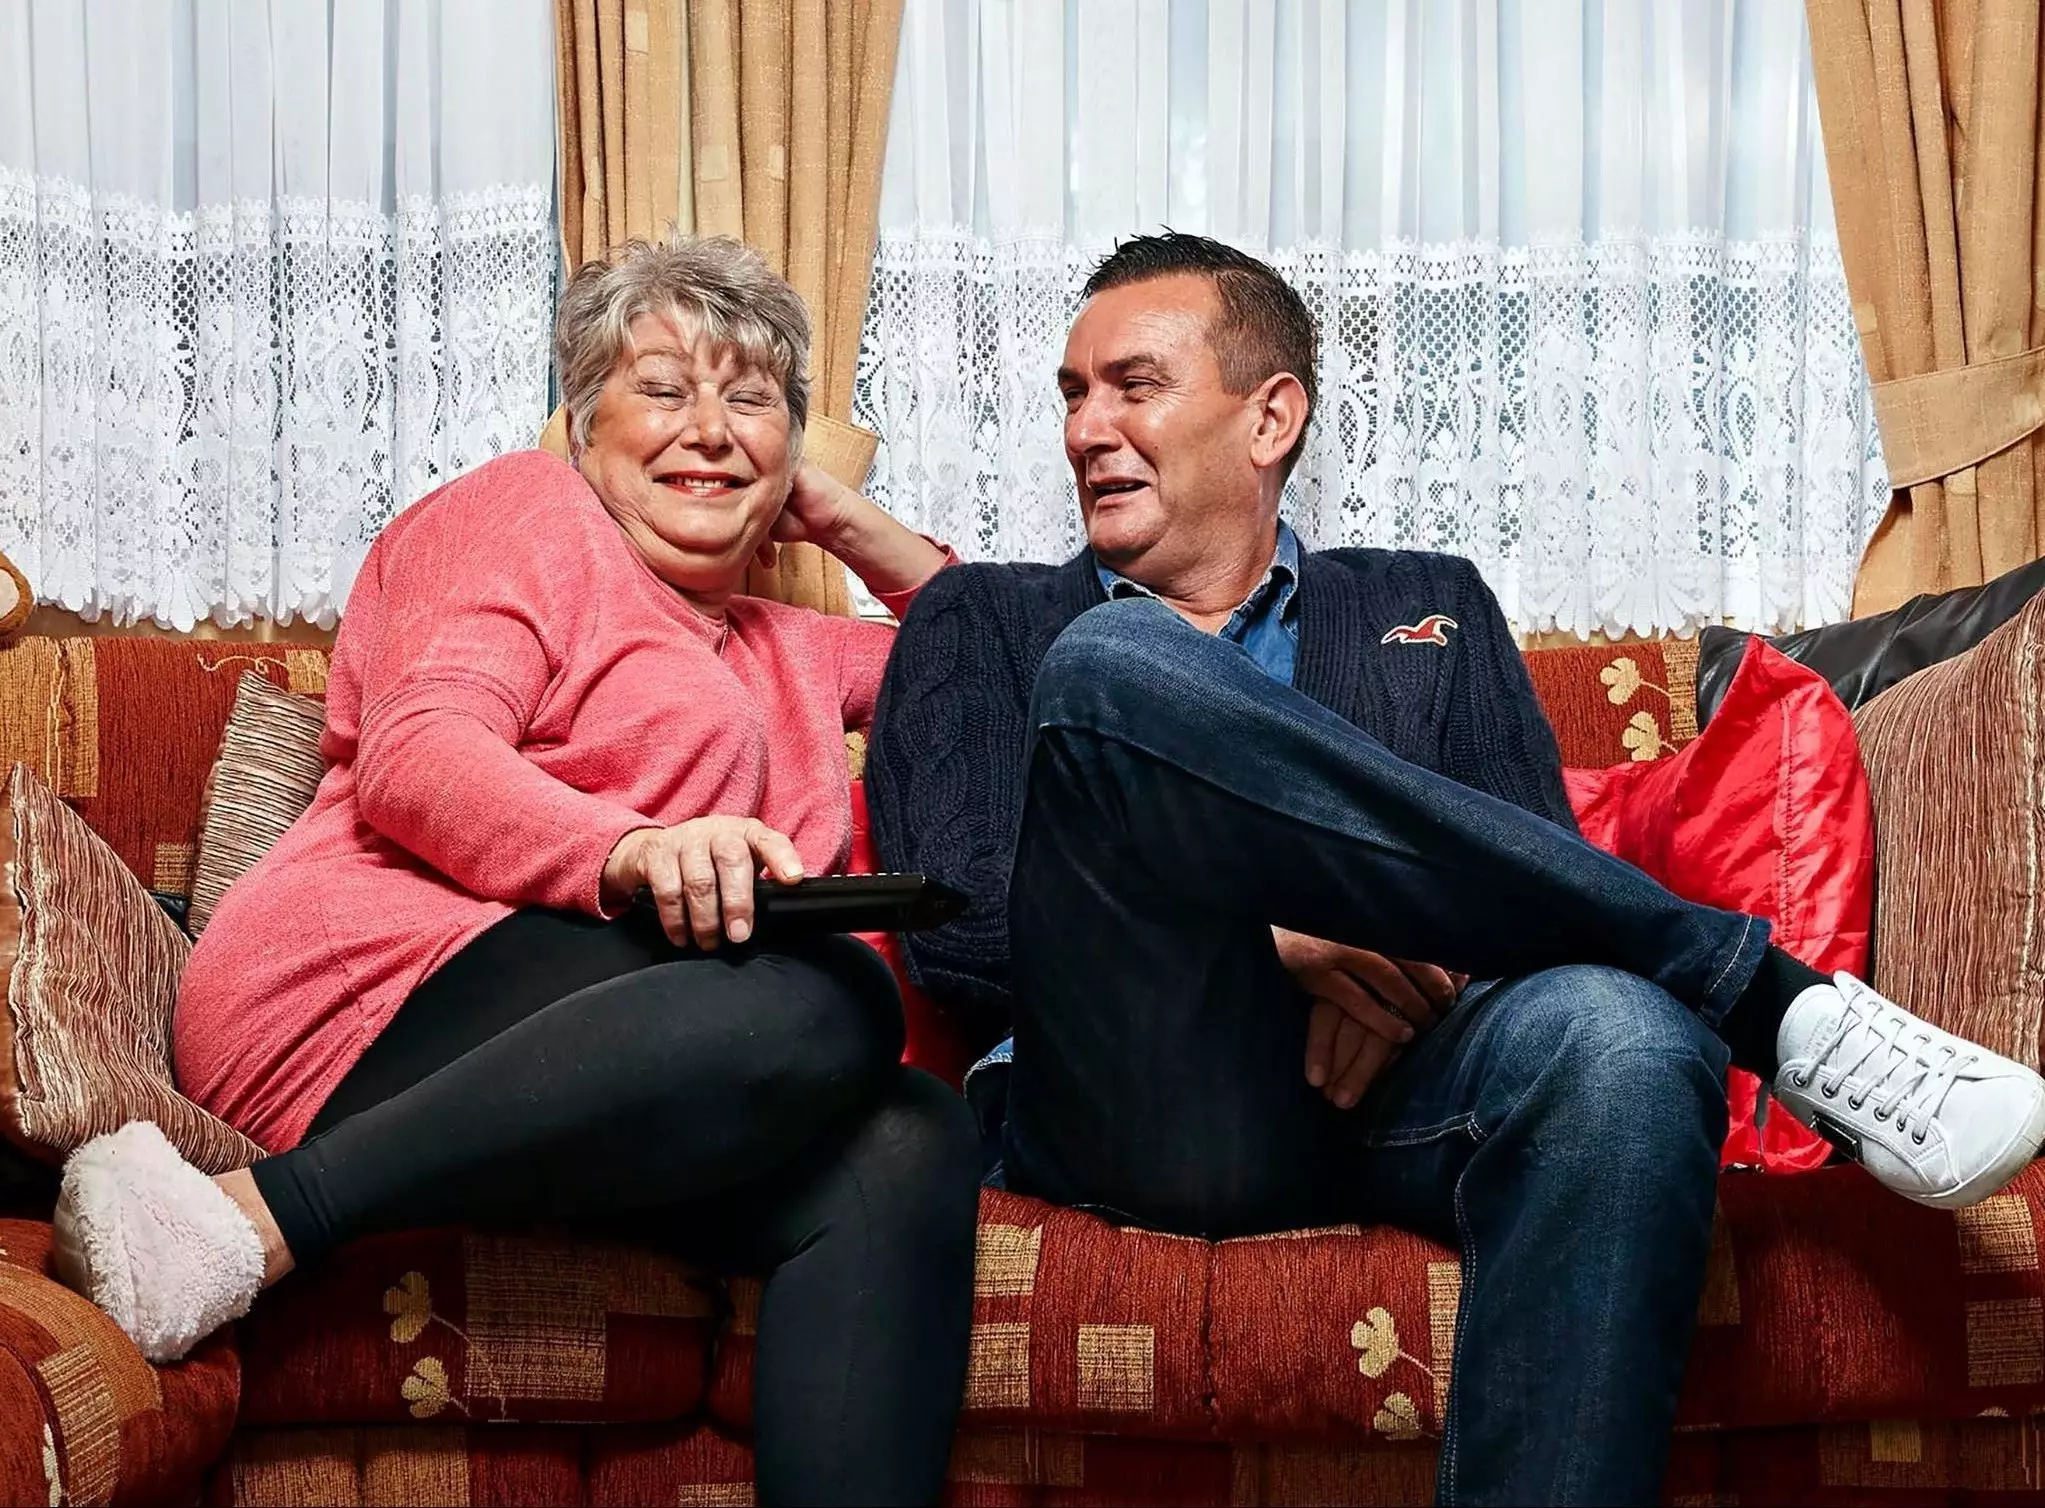 Gogglebox stars were accused of failing to social distance (